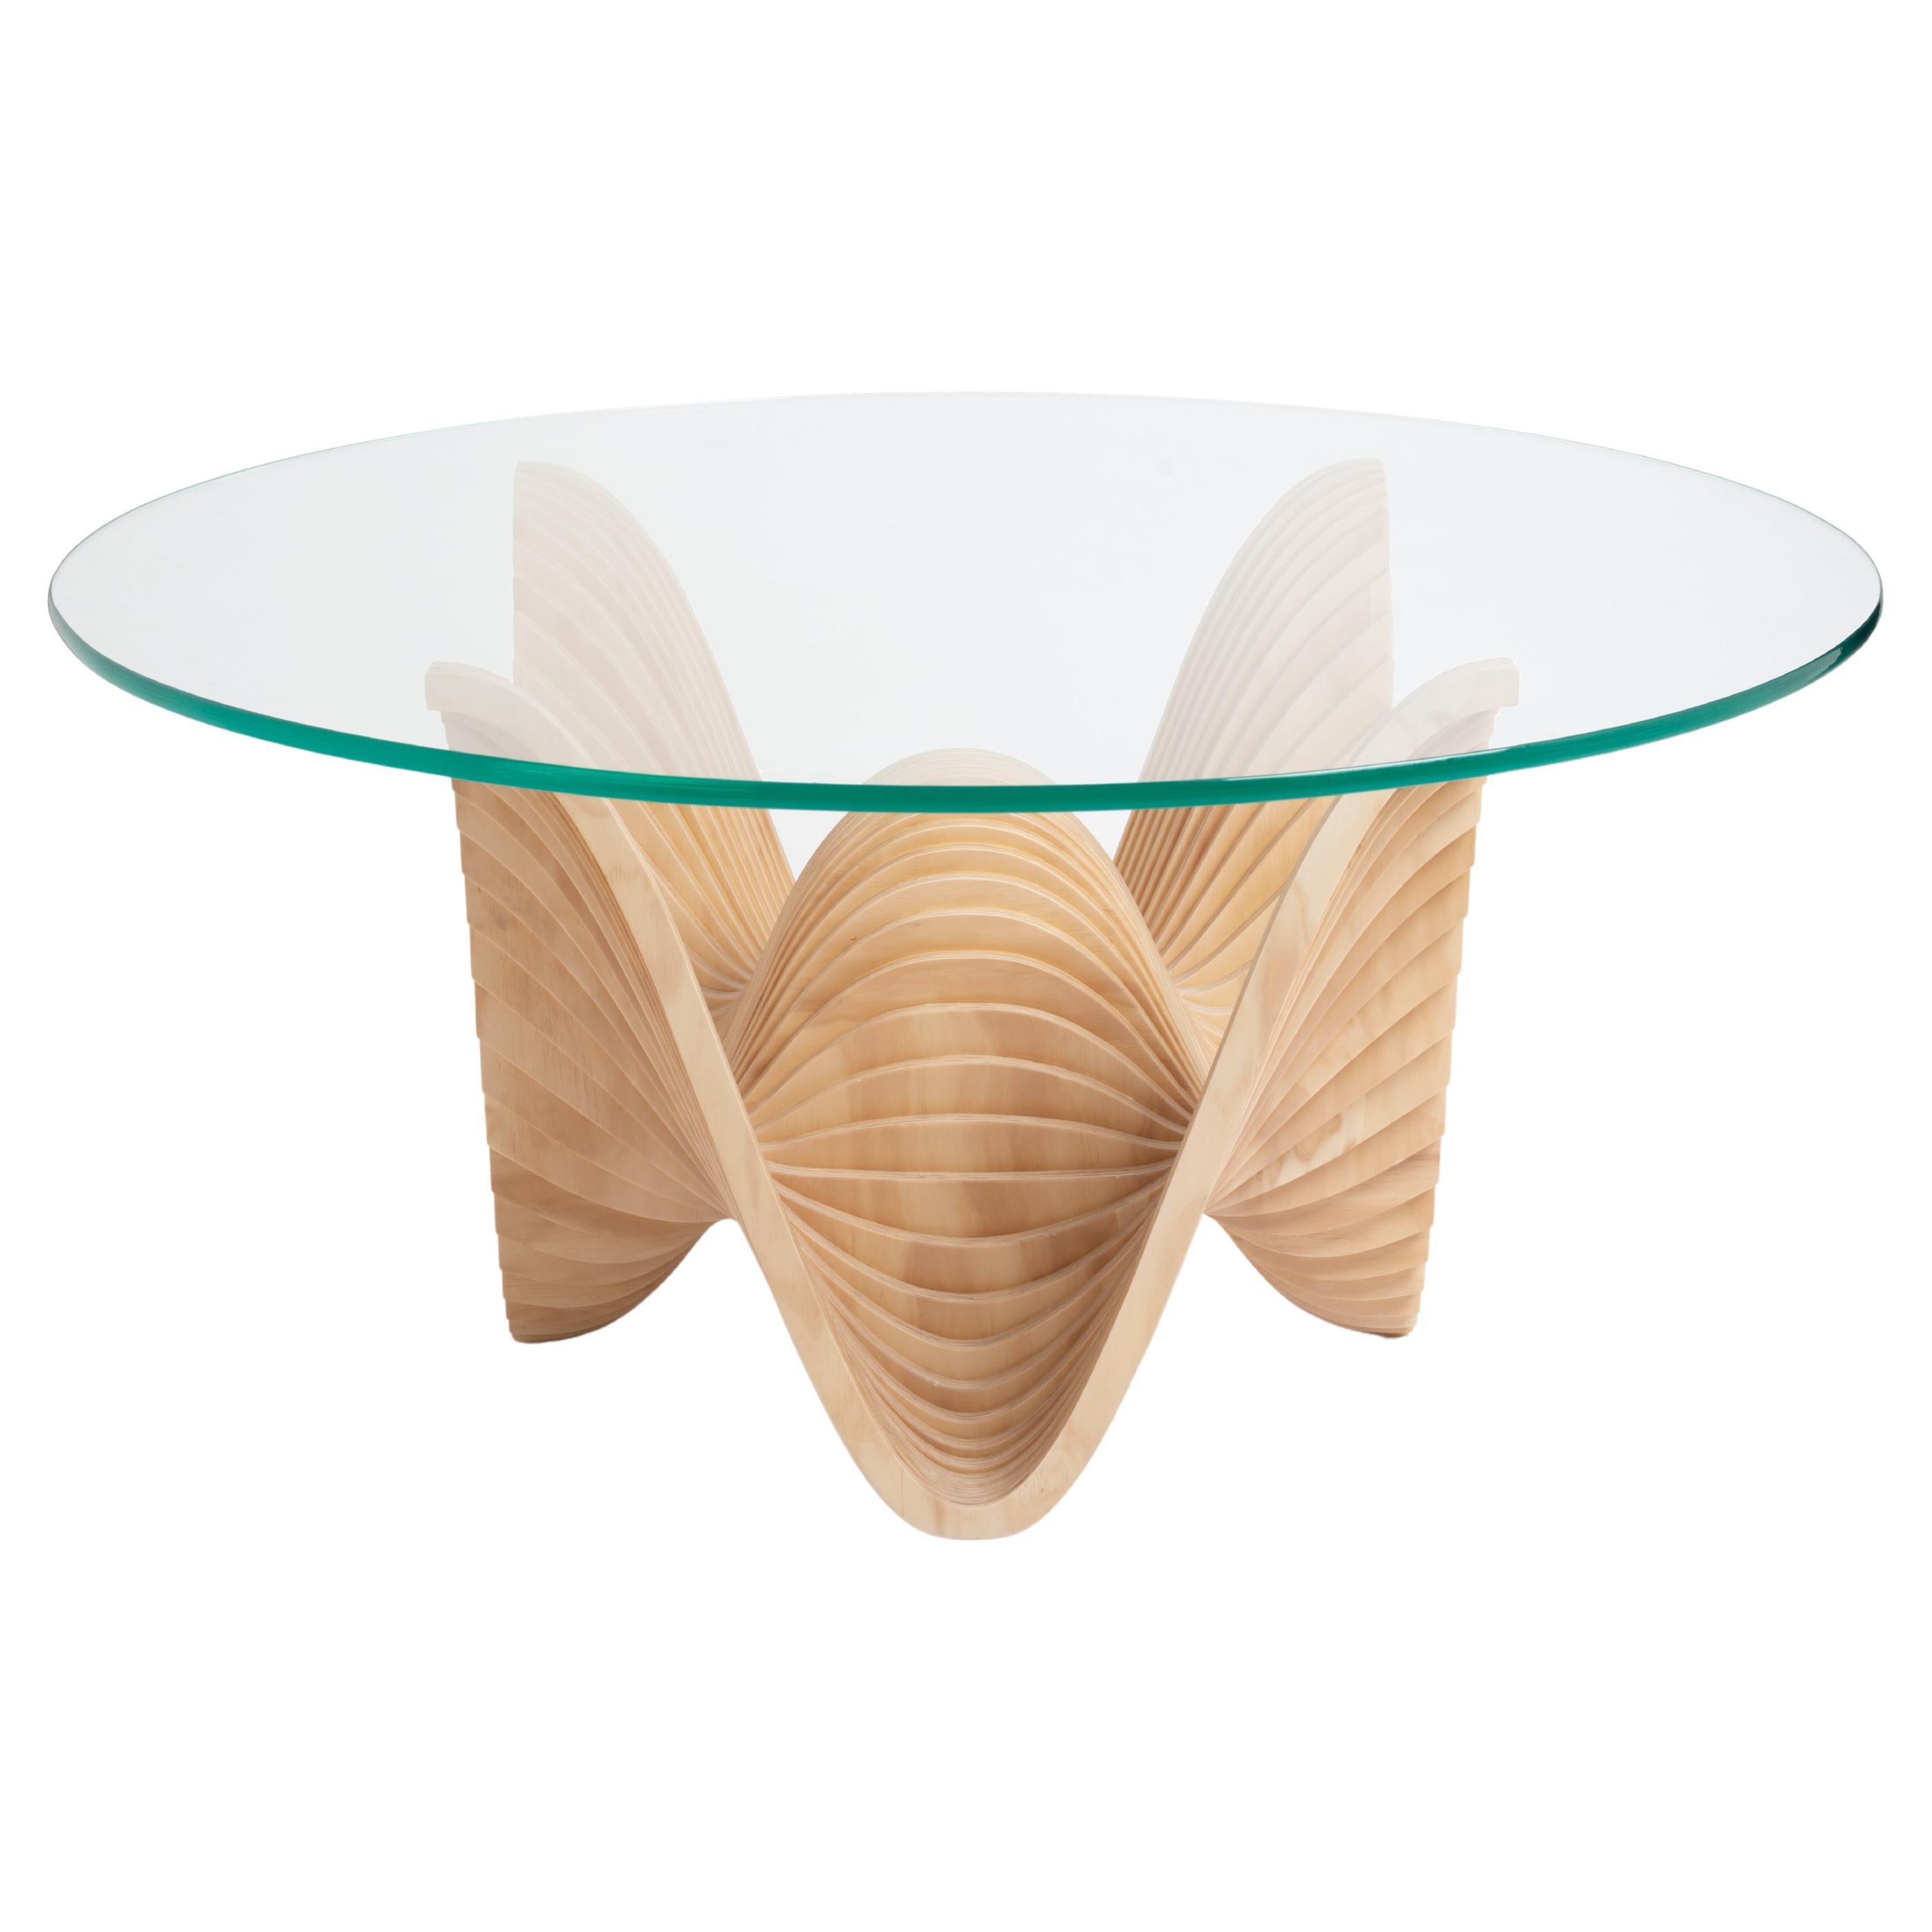 Candy Dining Table Medium by Piegatto, a Sculptural Contemporary Table